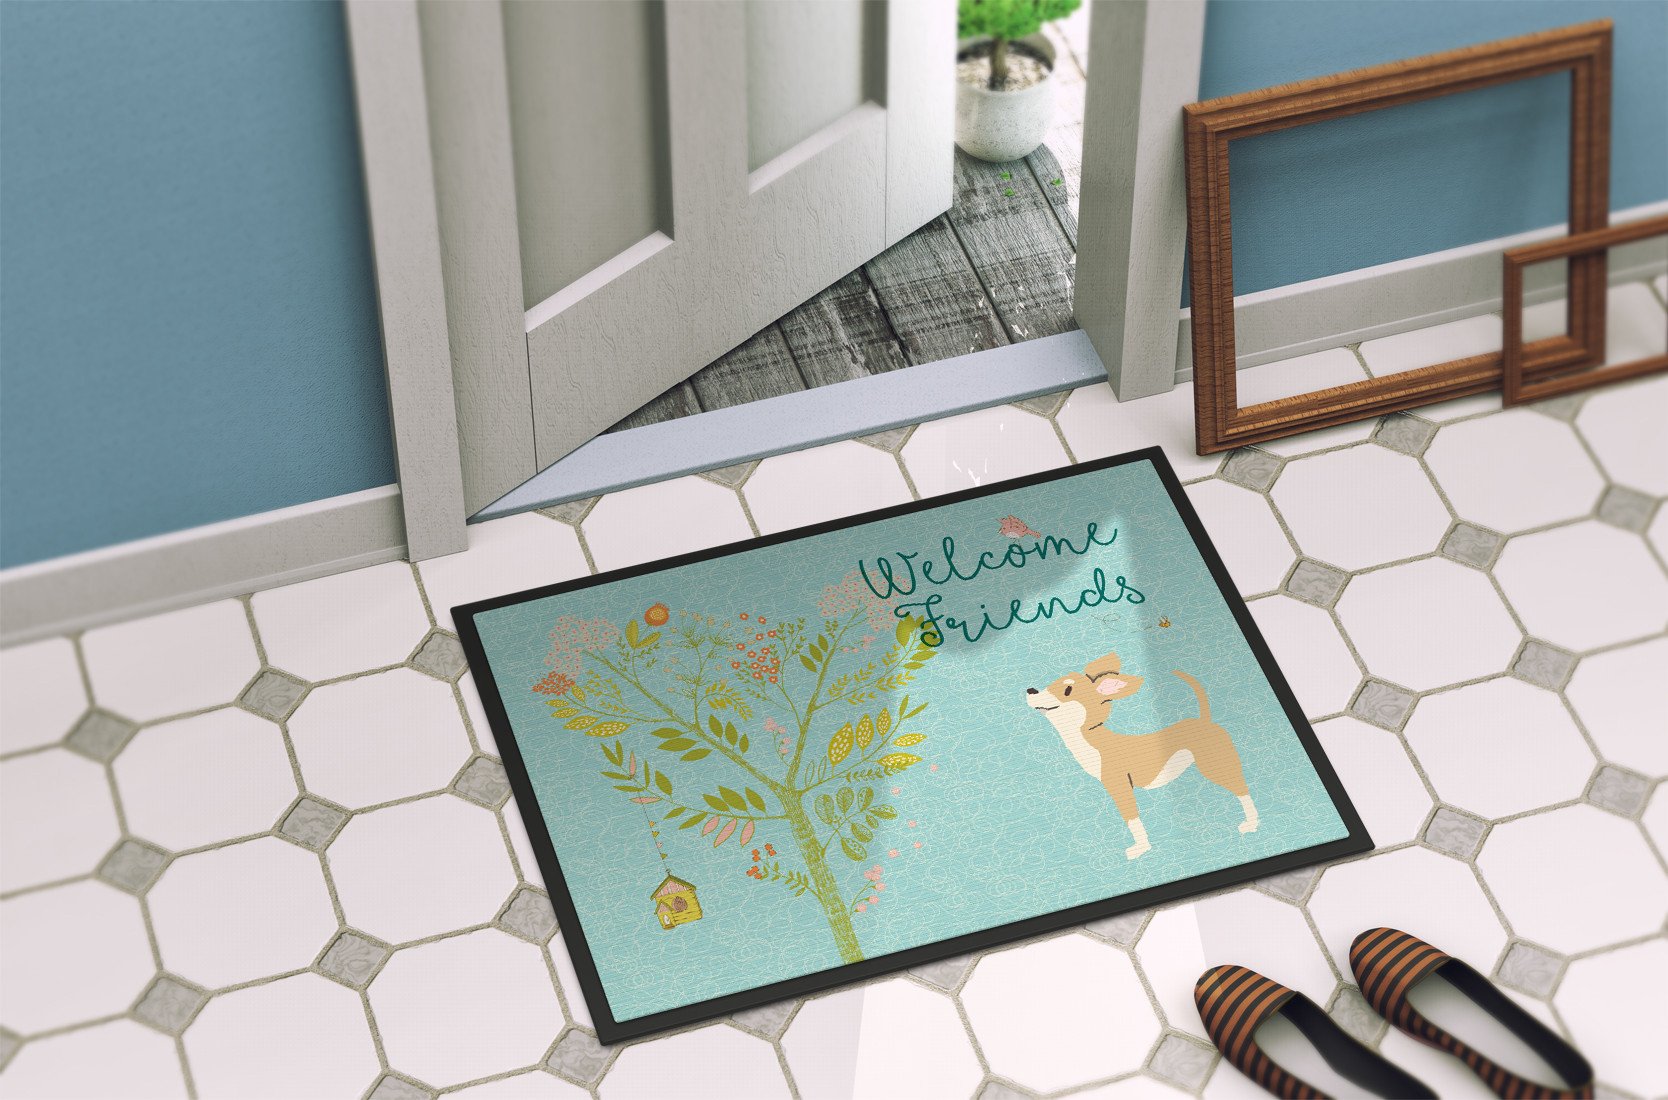 Welcome Friends Brown White Chihuahua Indoor or Outdoor Mat 24x36 BB7628JMAT by Caroline's Treasures